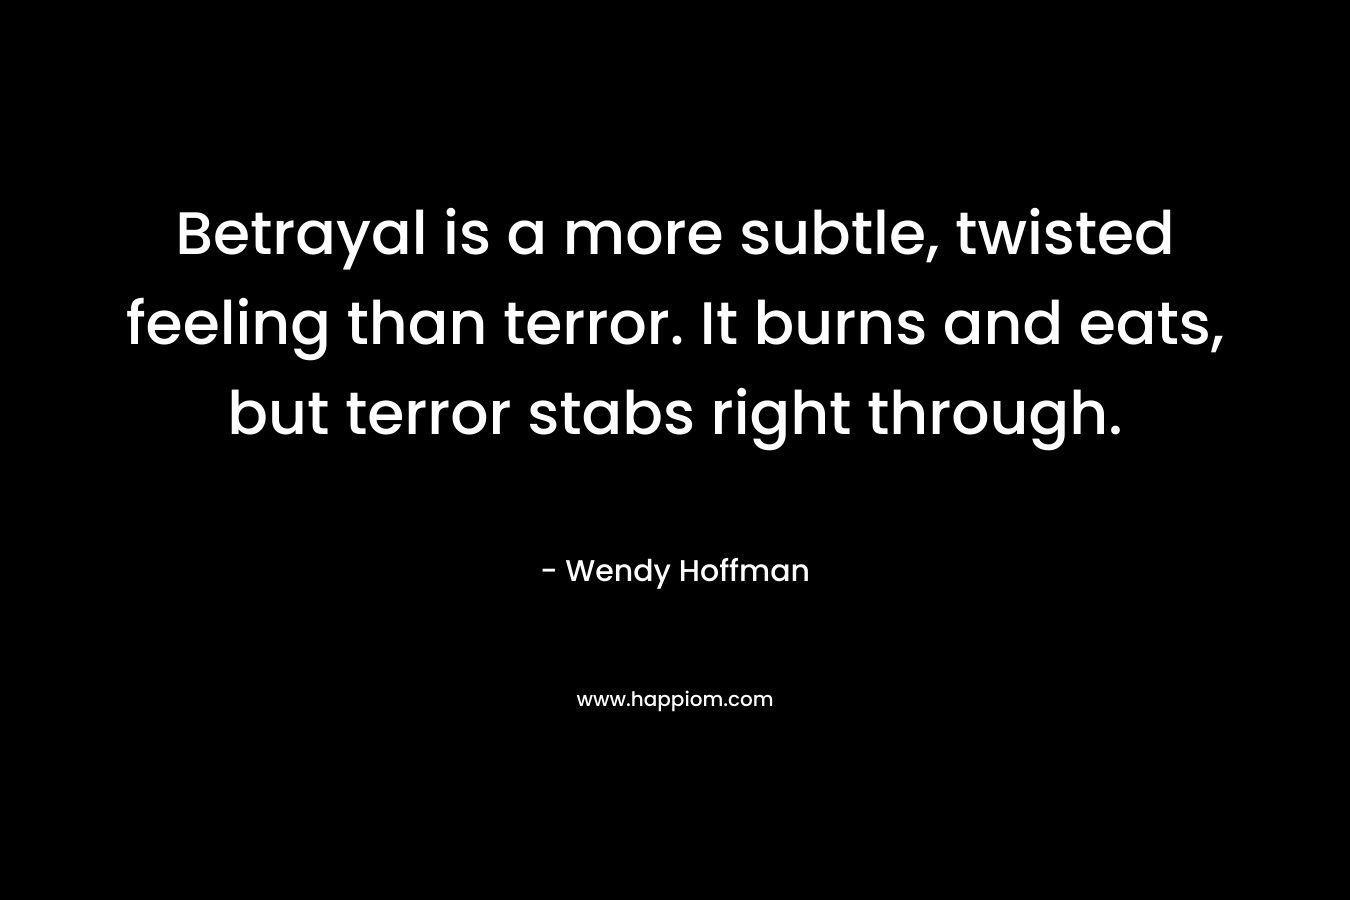 Betrayal is a more subtle, twisted feeling than terror. It burns and eats, but terror stabs right through.